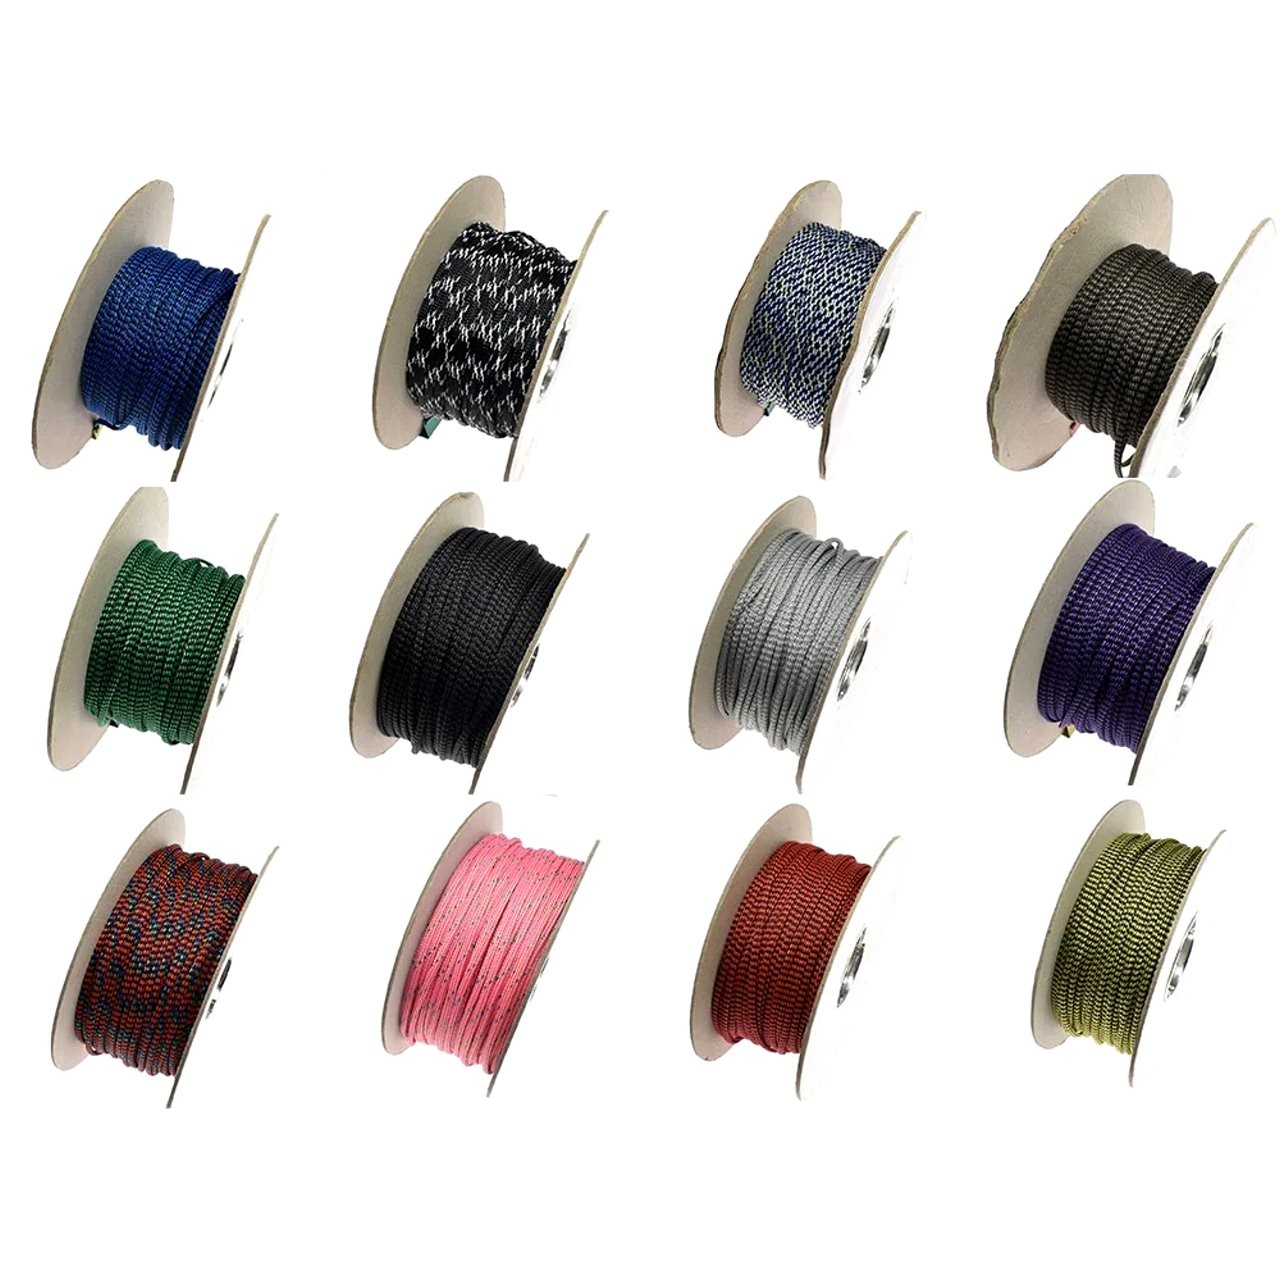 Expandable Braided Cable Sleeving, PET, Colour, 12mm & 15mm width